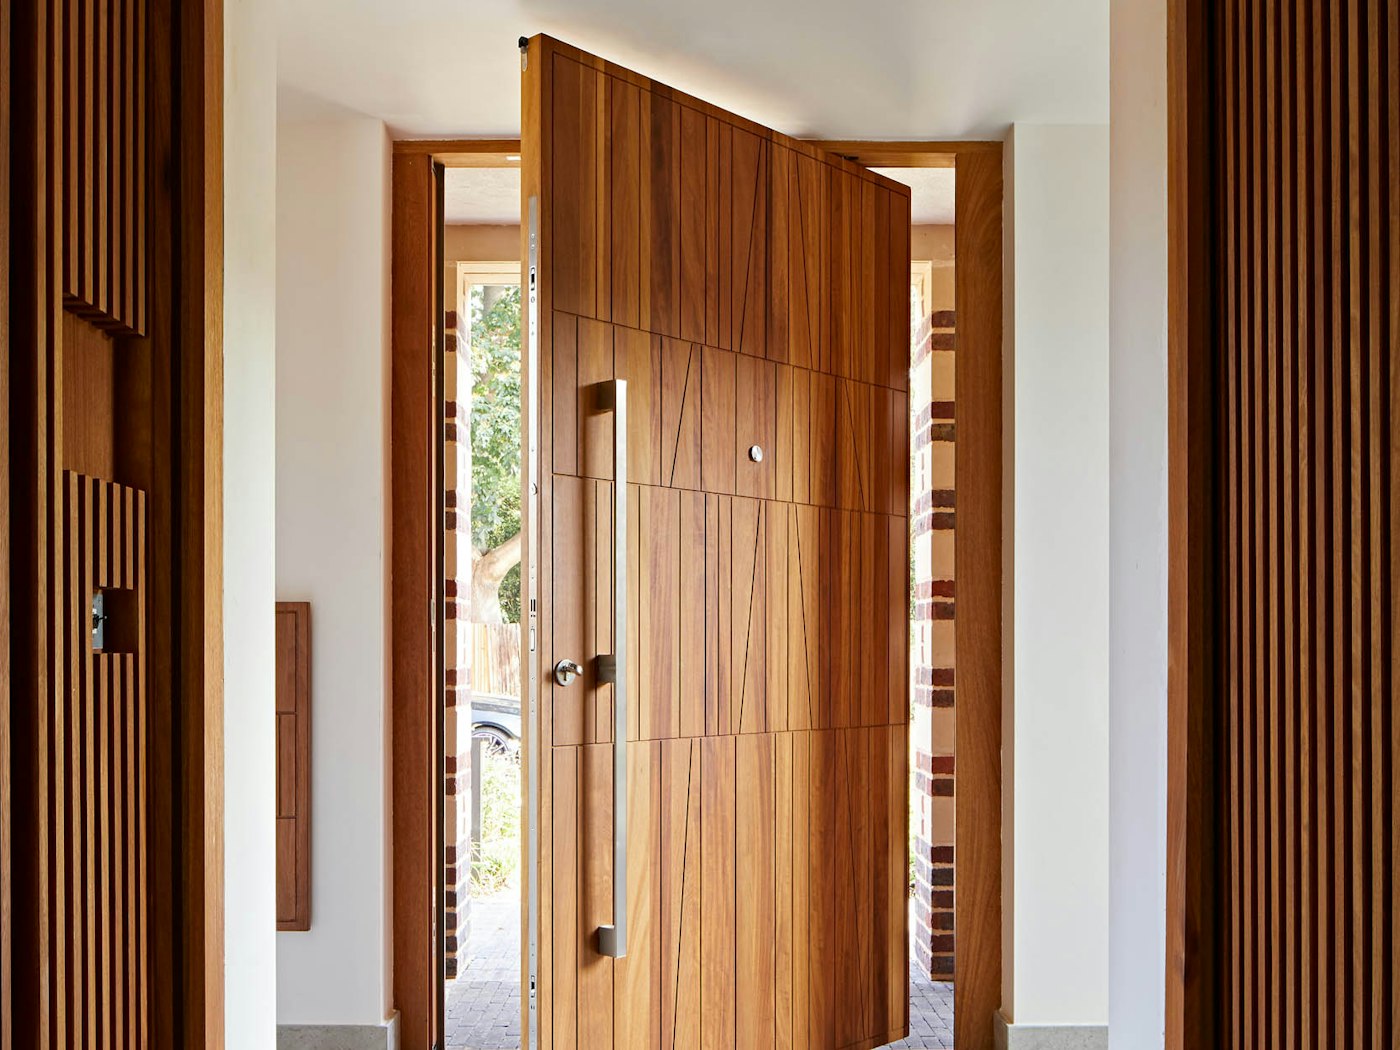 Our uniquely intricate Quattro design, in luxury iroko with a pivot opening